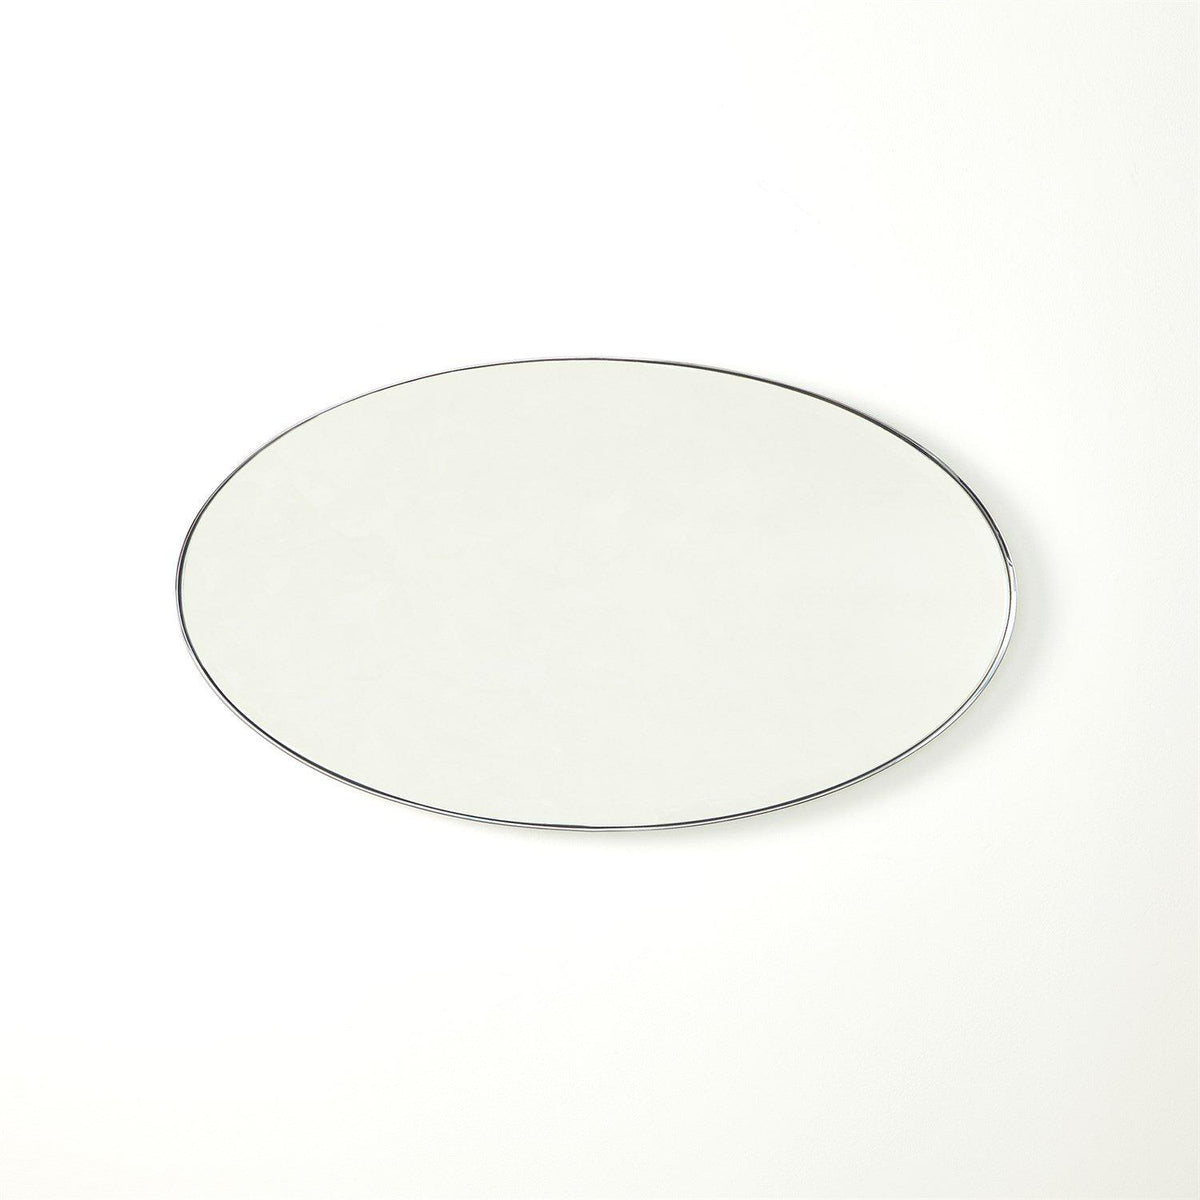 Elongated Oval Mirror-Nickel-Sm-Global Views-Wall Mirrors-Artistic Elements